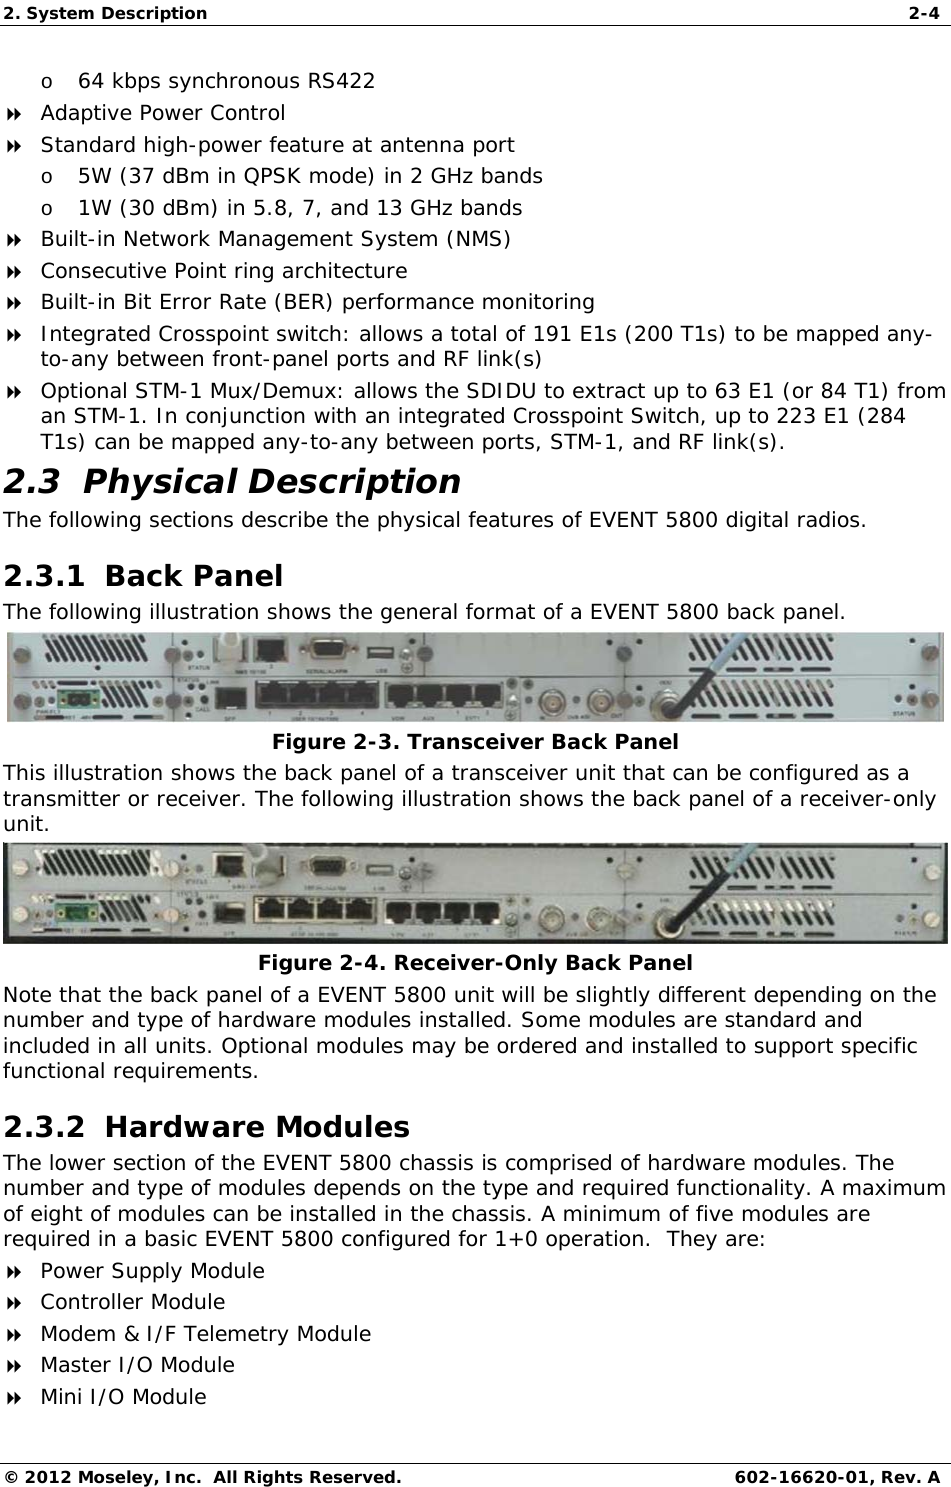 2. System Description  2-4 © 2012 Moseley, Inc.  All Rights Reserved.  602-16620-01, Rev. A o 64 kbps synchronous RS422    Adaptive Power Control  Standard high-power feature at antenna port o 5W (37 dBm in QPSK mode) in 2 GHz bands o 1W (30 dBm) in 5.8, 7, and 13 GHz bands  Built-in Network Management System (NMS)  Consecutive Point ring architecture  Built-in Bit Error Rate (BER) performance monitoring  Integrated Crosspoint switch: allows a total of 191 E1s (200 T1s) to be mapped any-to-any between front-panel ports and RF link(s)  Optional STM-1 Mux/Demux: allows the SDIDU to extract up to 63 E1 (or 84 T1) from an STM-1. In conjunction with an integrated Crosspoint Switch, up to 223 E1 (284 T1s) can be mapped any-to-any between ports, STM-1, and RF link(s).  2.3  Physical Description The following sections describe the physical features of EVENT 5800 digital radios. 2.3.1  Back Panel The following illustration shows the general format of a EVENT 5800 back panel.  Figure 2-3. Transceiver Back Panel This illustration shows the back panel of a transceiver unit that can be configured as a transmitter or receiver. The following illustration shows the back panel of a receiver-only unit.   Figure 2-4. Receiver-Only Back Panel Note that the back panel of a EVENT 5800 unit will be slightly different depending on the number and type of hardware modules installed. Some modules are standard and included in all units. Optional modules may be ordered and installed to support specific functional requirements.  2.3.2  Hardware Modules  The lower section of the EVENT 5800 chassis is comprised of hardware modules. The number and type of modules depends on the type and required functionality. A maximum of eight of modules can be installed in the chassis. A minimum of five modules are required in a basic EVENT 5800 configured for 1+0 operation.  They are:  Power Supply Module  Controller Module  Modem &amp; I/F Telemetry Module  Master I/O Module  Mini I/O Module 